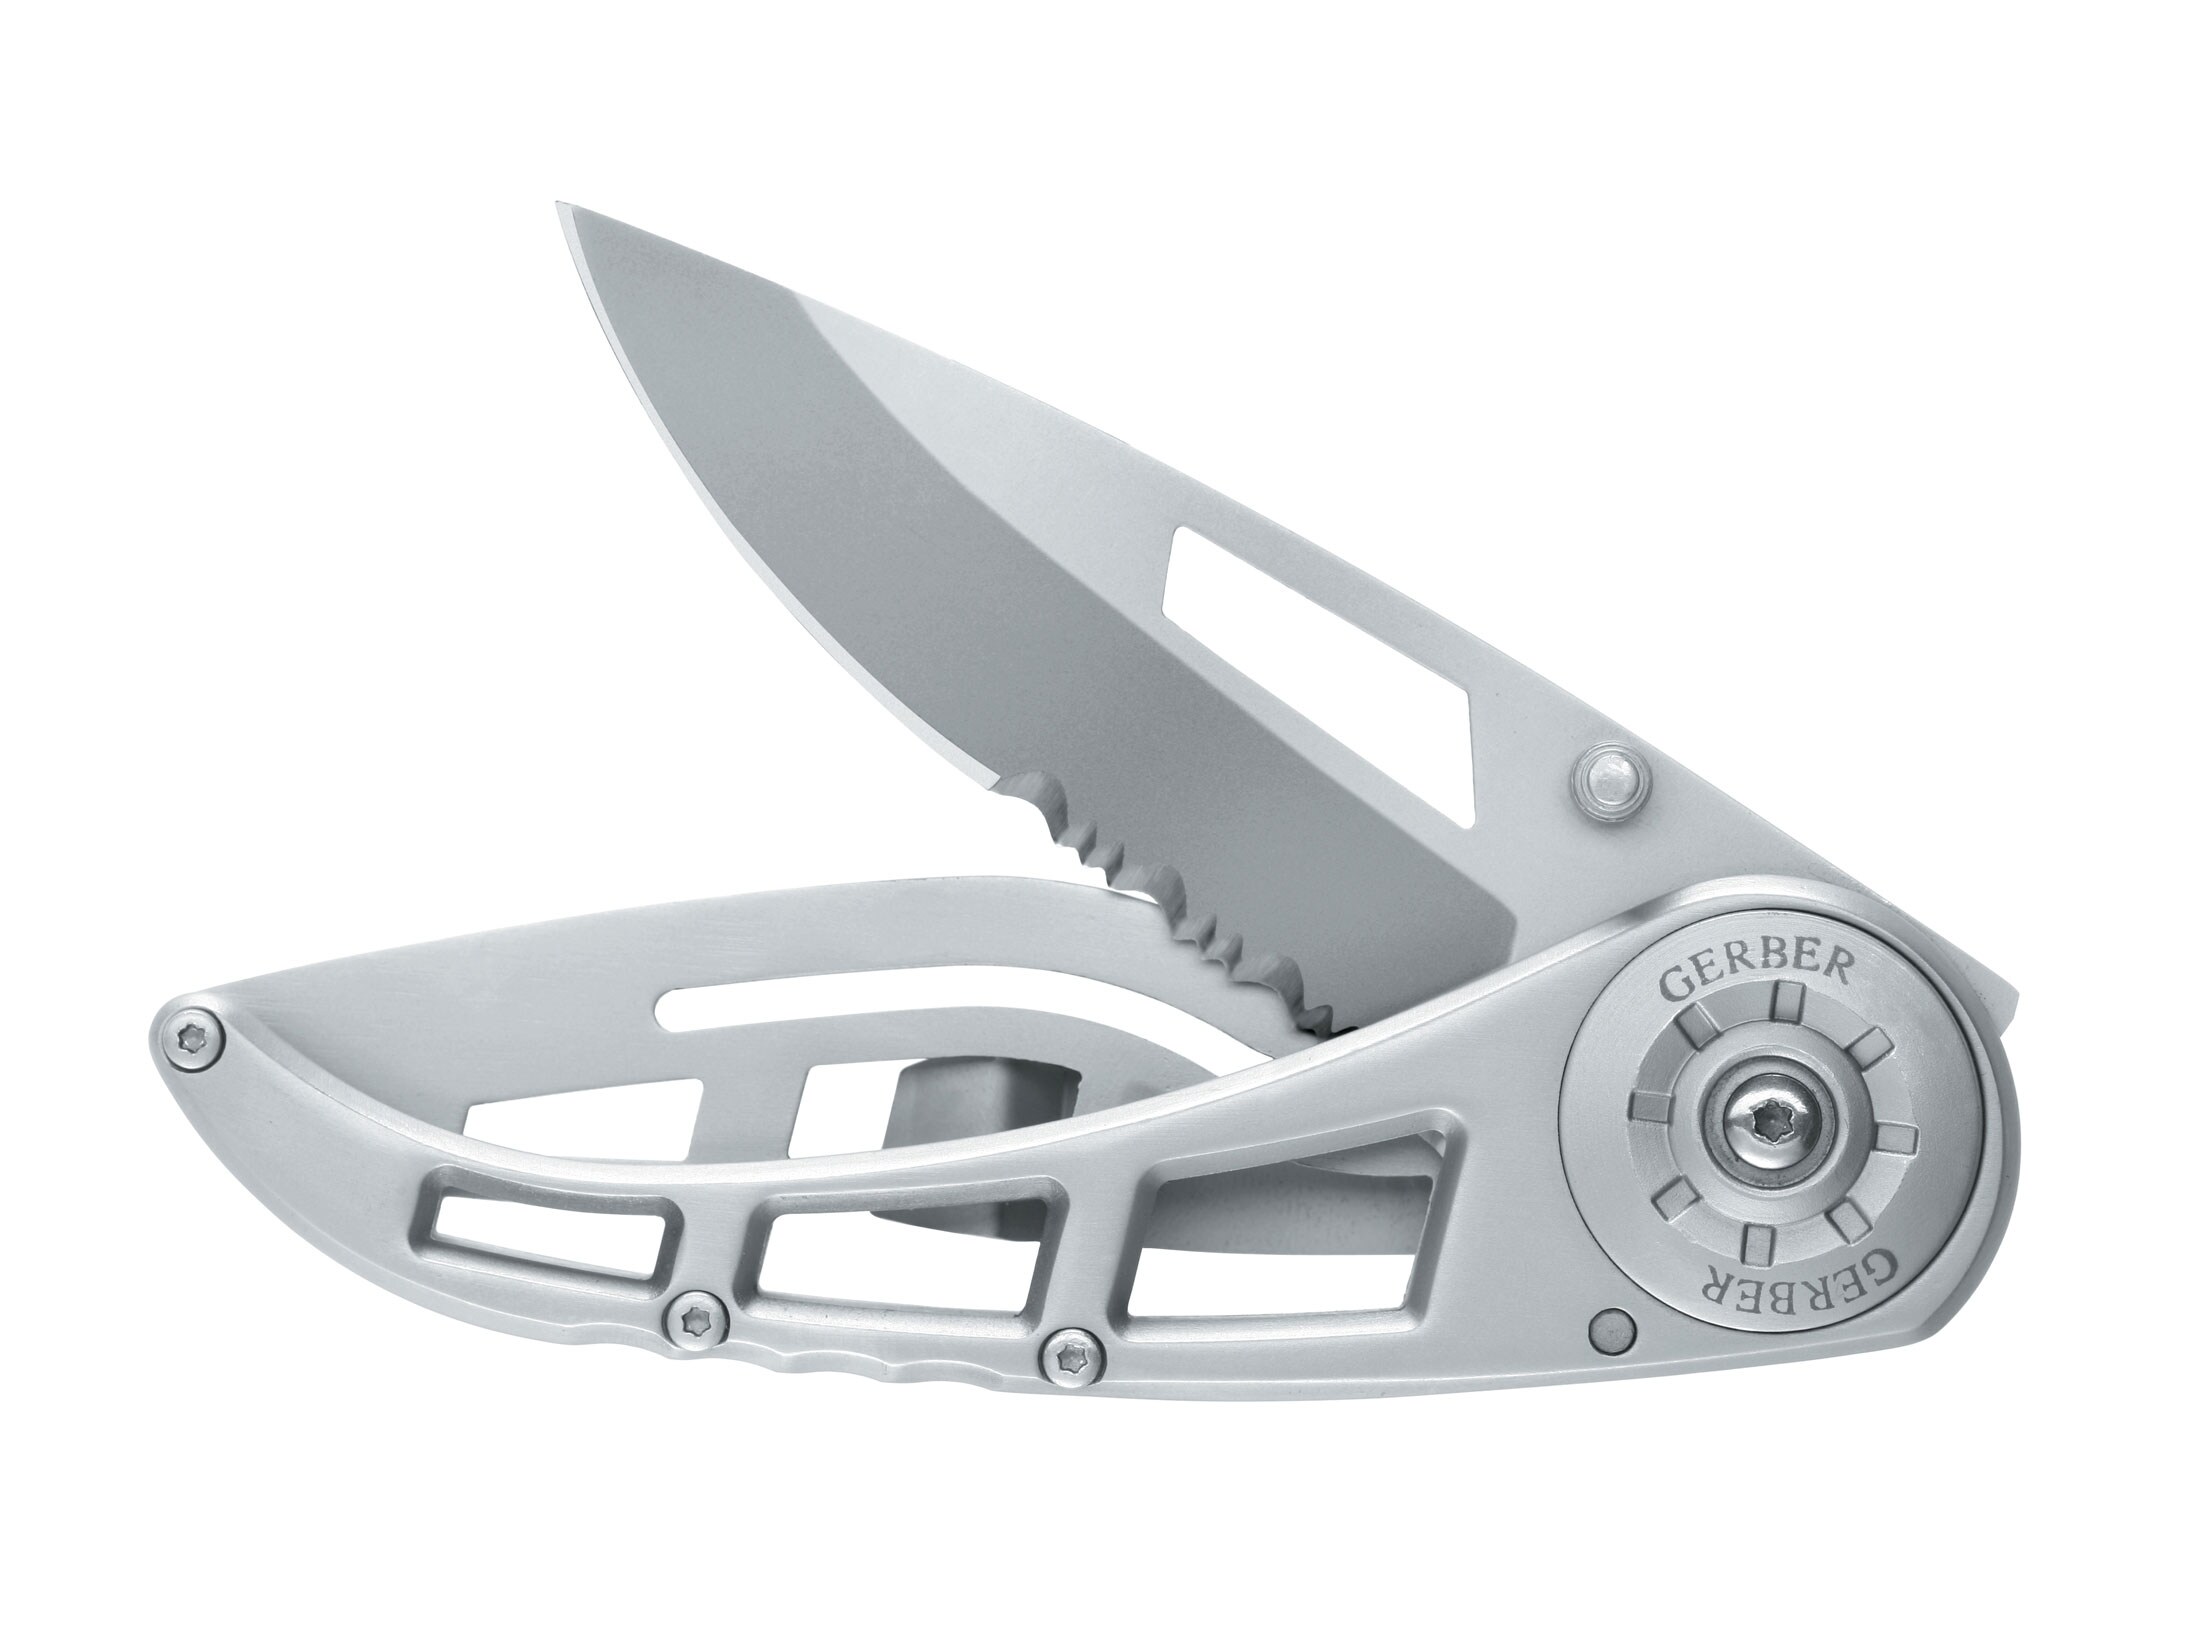 Gerber Ripstop II Folding Knife 3″ Serrated Drop Point 7Cr17 Stainless Steel Blade and Handle For Sale